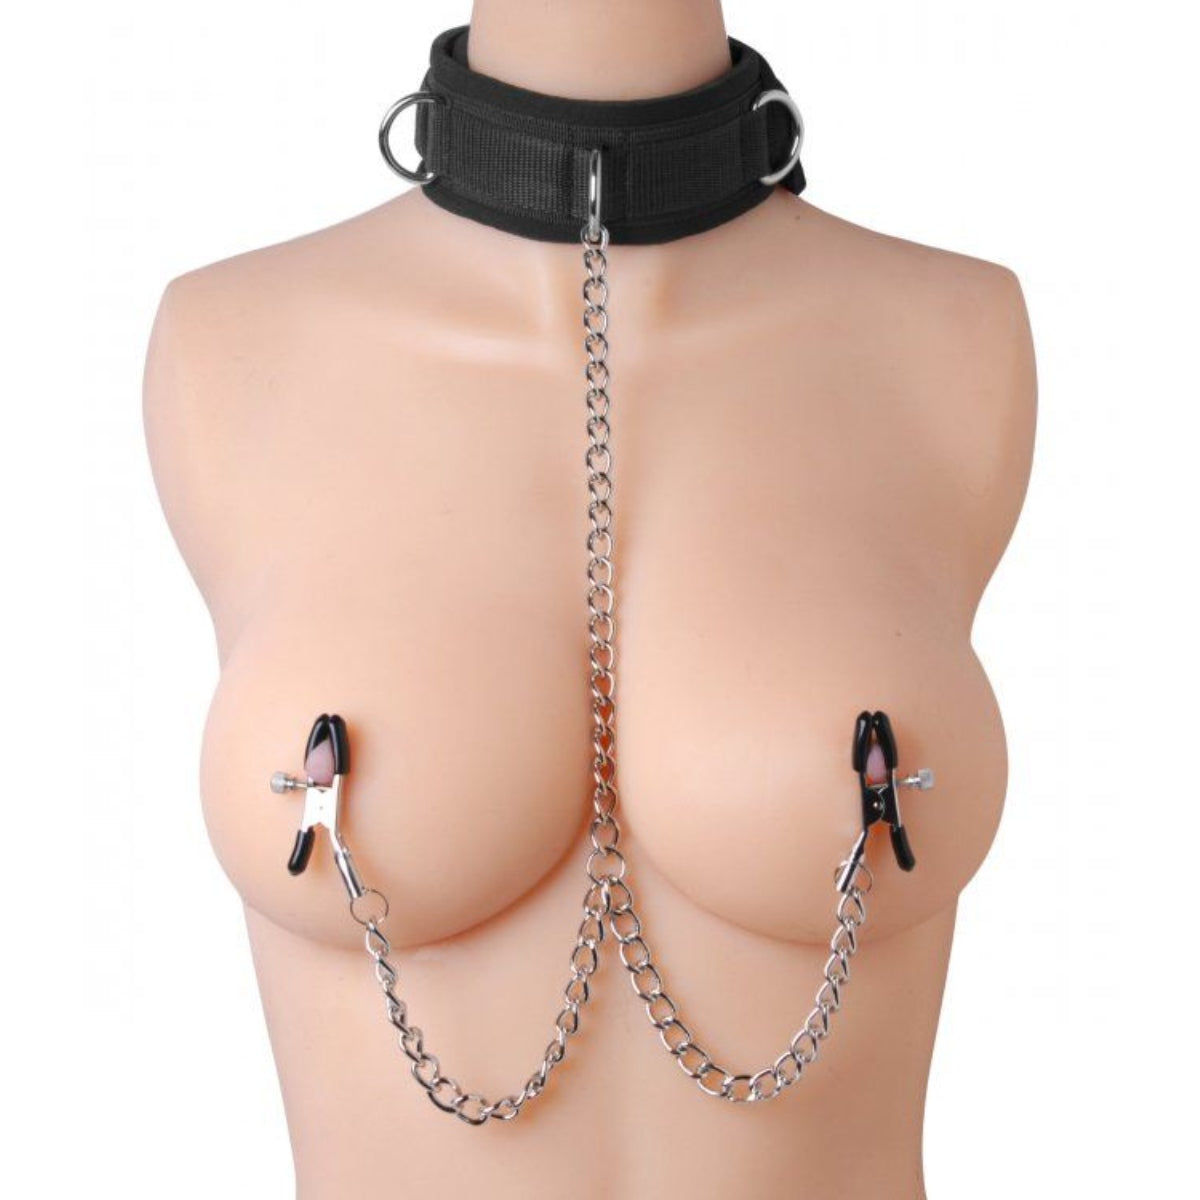 Master Series Submission Collar And Nipple Clamp Union Set Black Silver